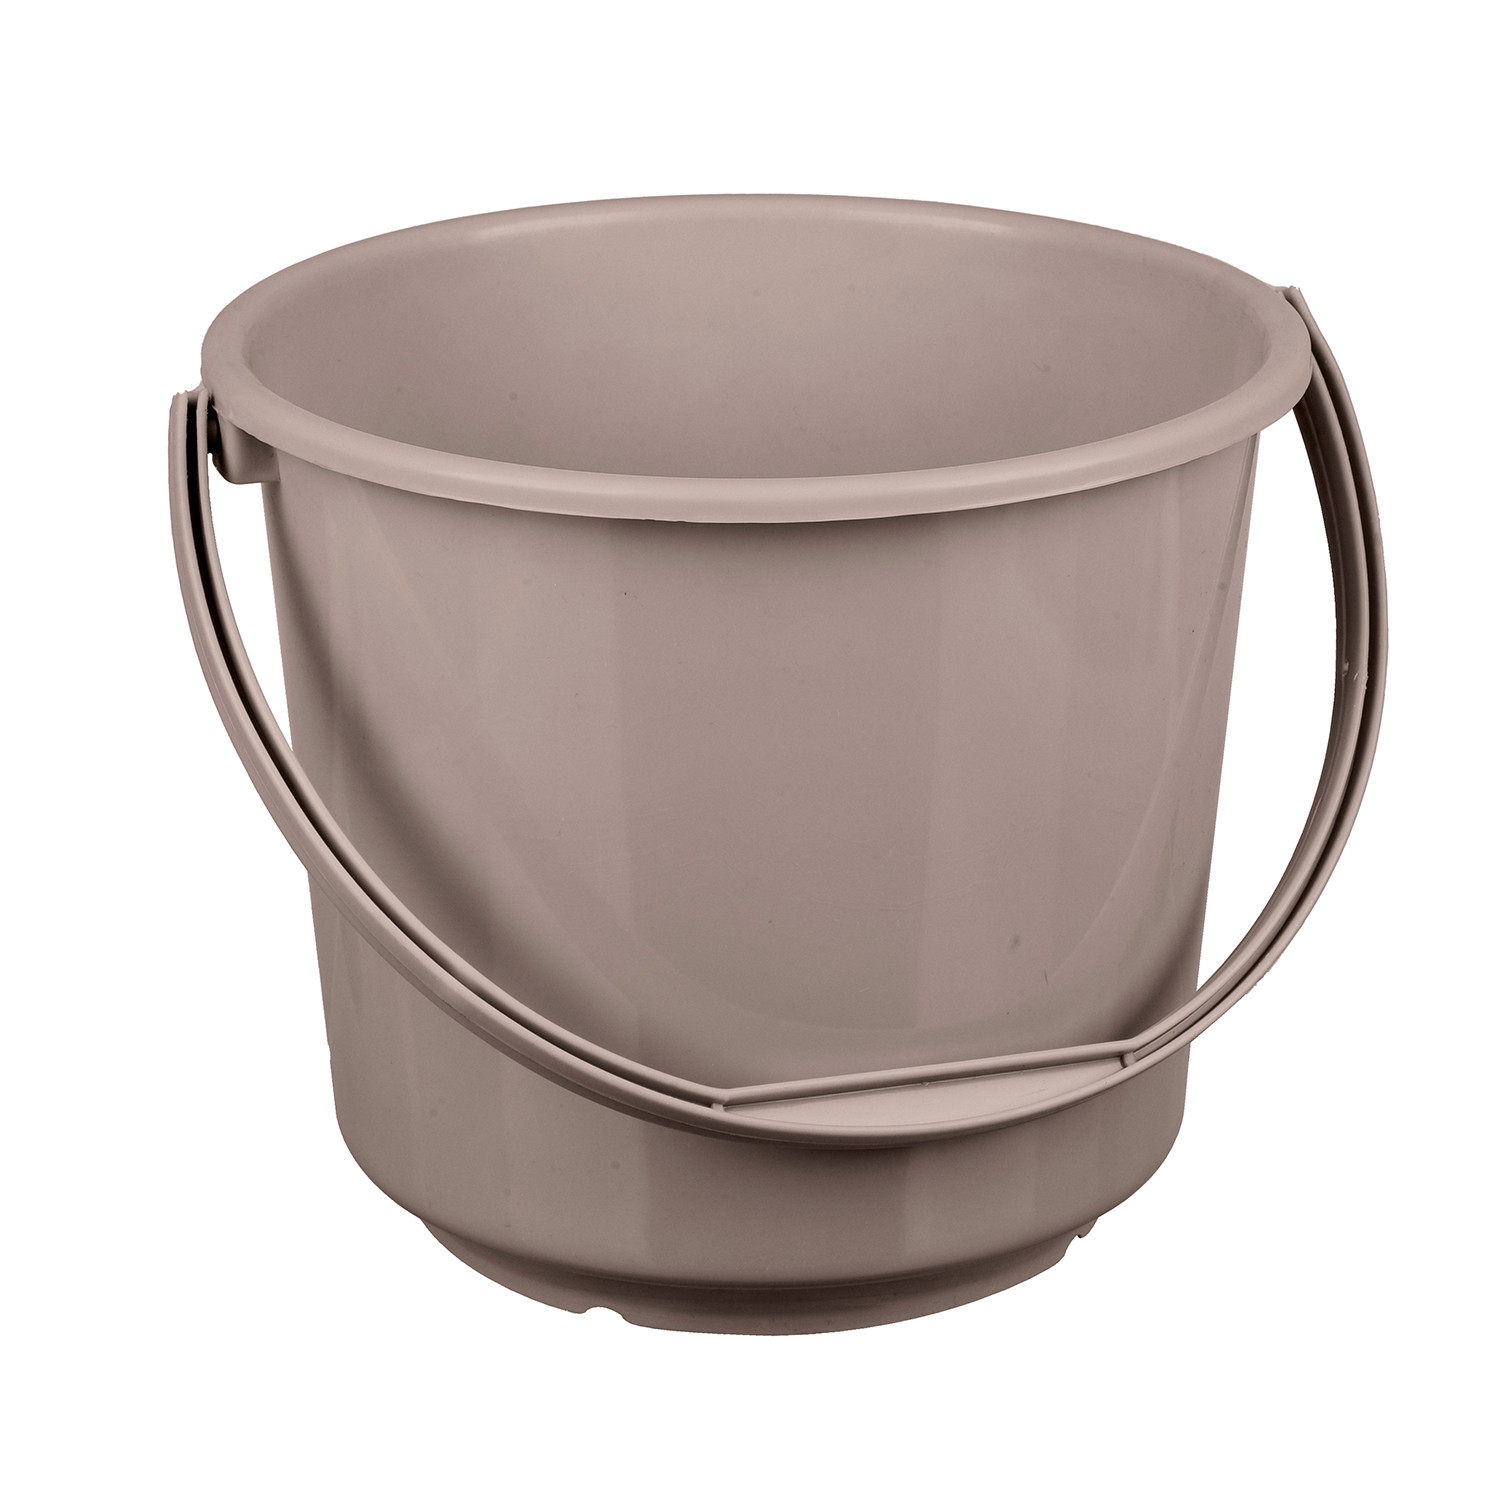 Kuber Industries Bucket | Plastic Bucket for Mopping | Bucket for Cleaning | Storage Container Bucket | Water Storage Bucket | Bathroom Bucket | Plain Bucket | 5 LTR | Brown